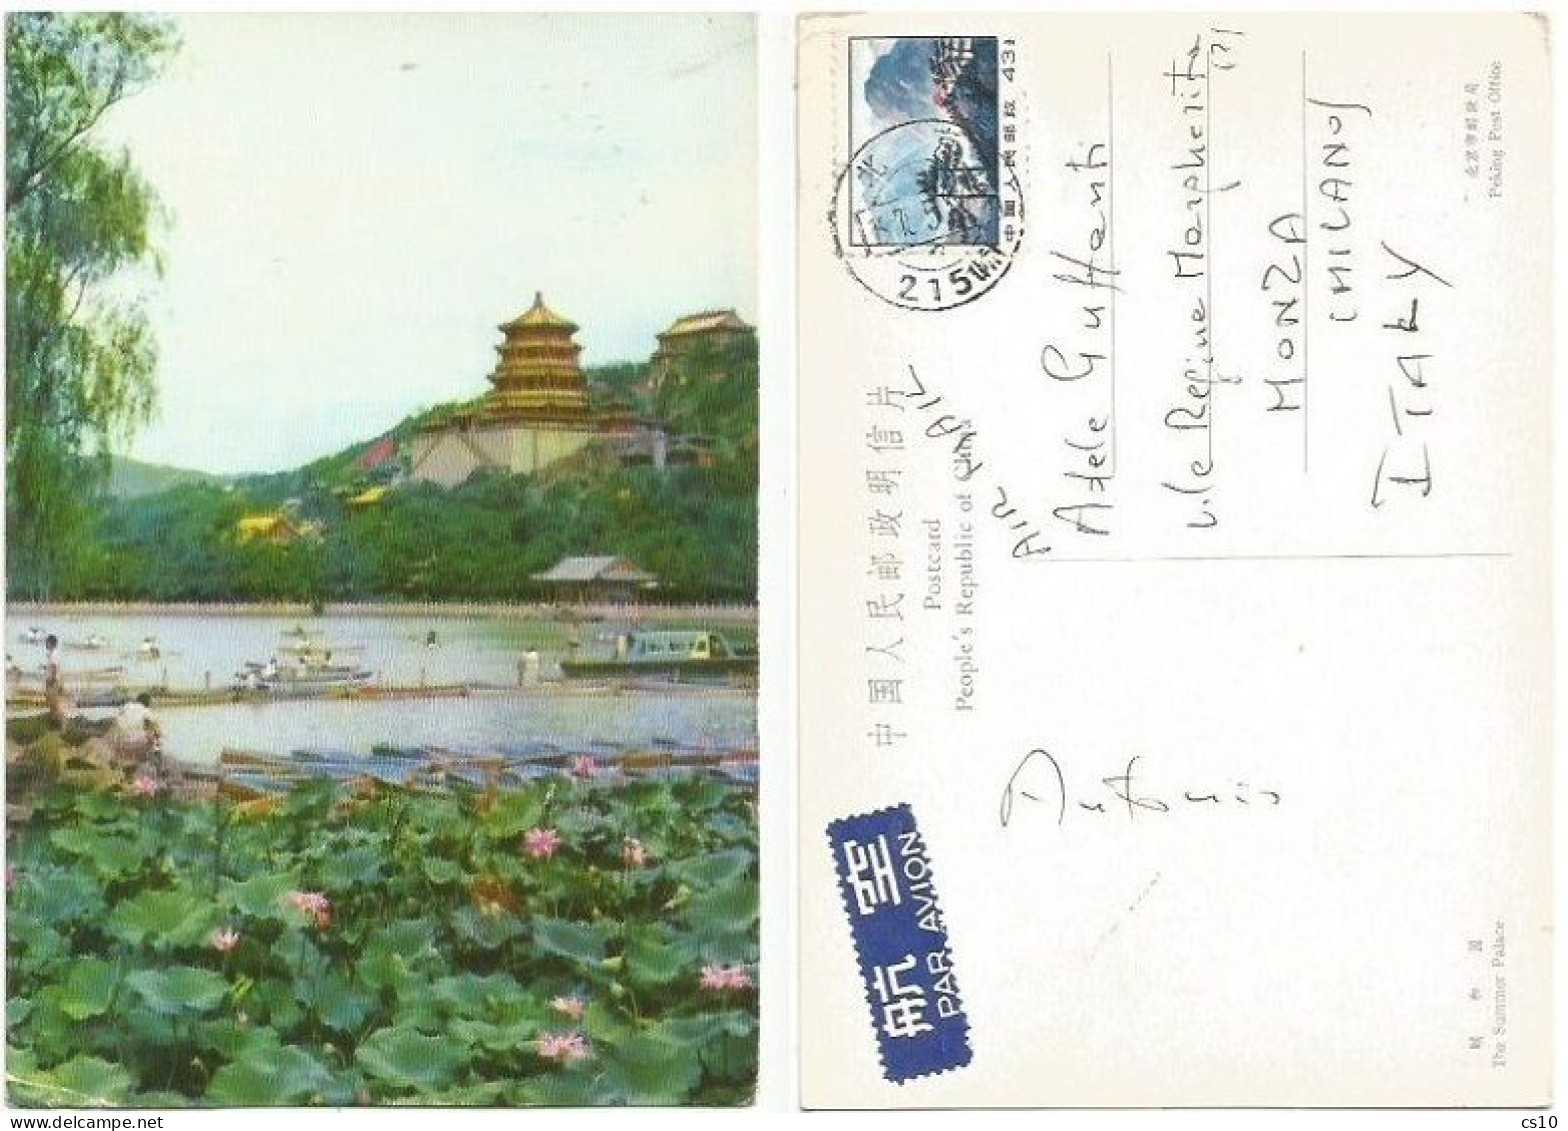 China 1971 Revolutionary Sites F.43 Solo Franking Airmail Pcard Beijing 11may1975 To Italy - Briefe U. Dokumente